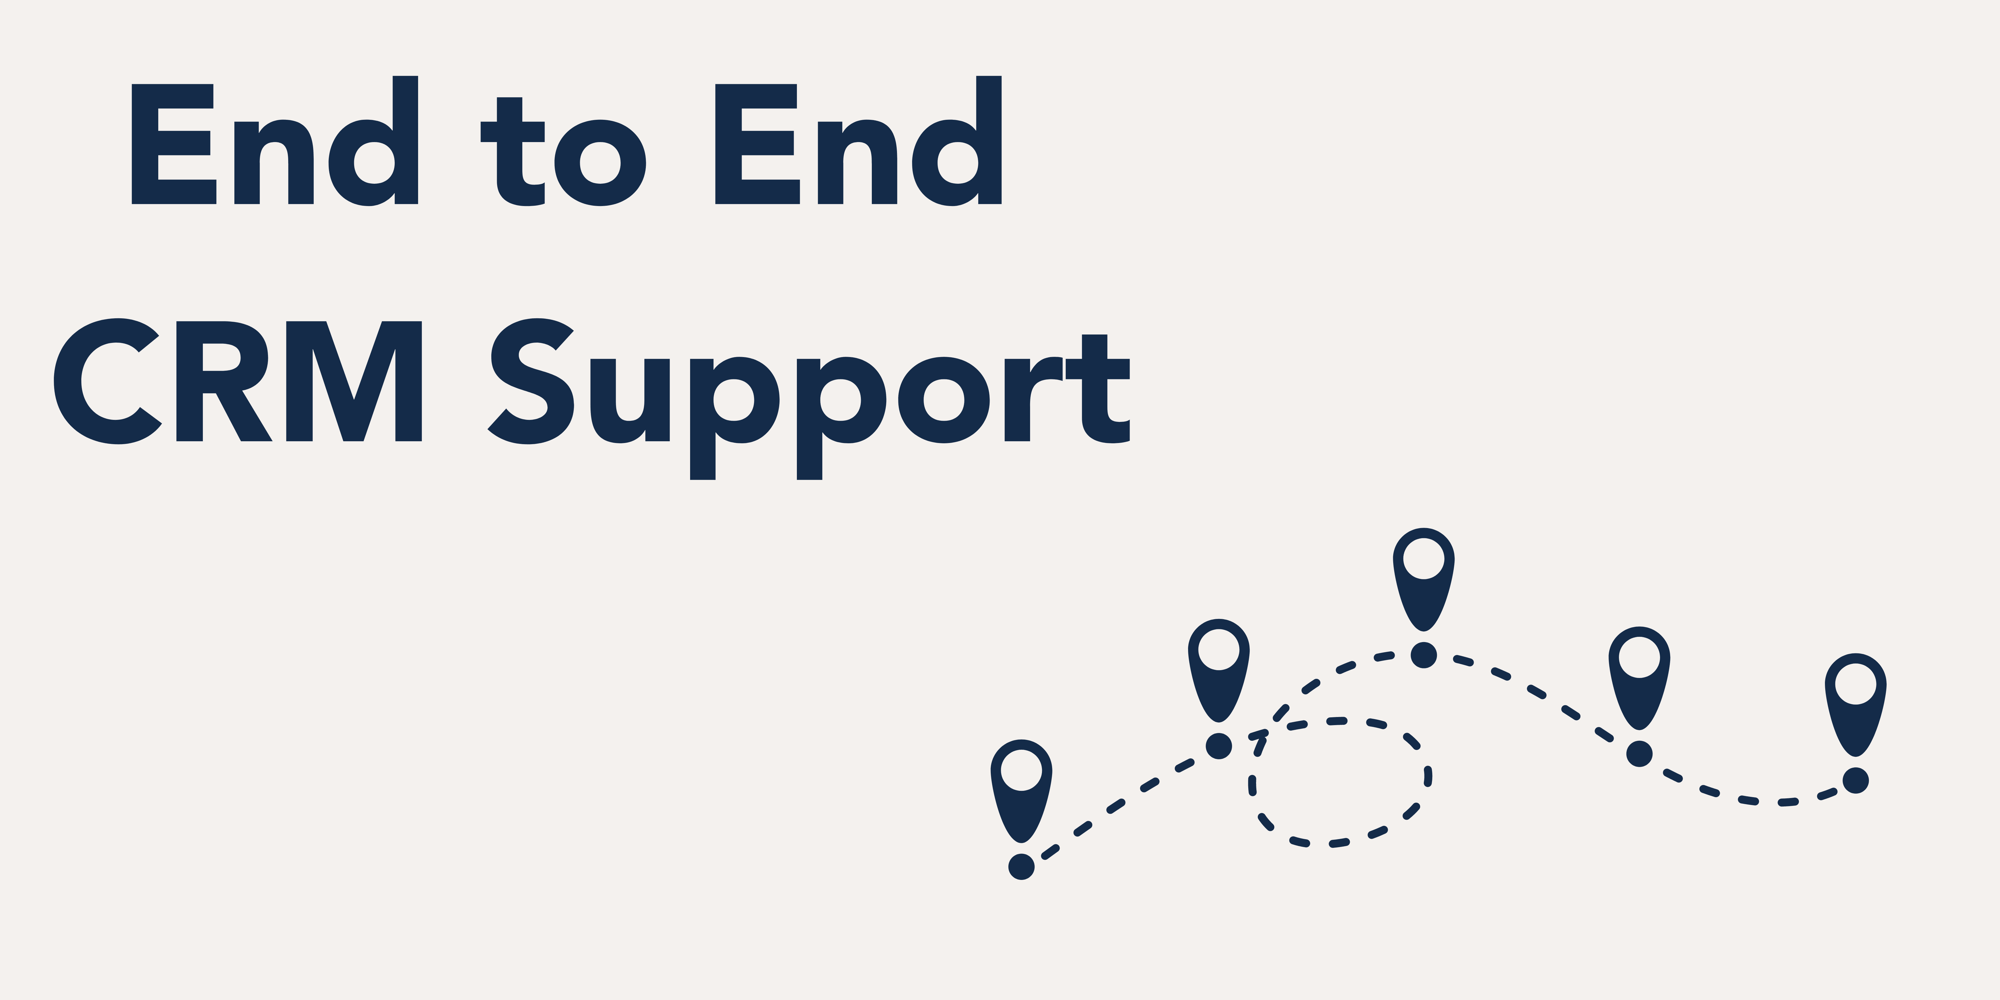 End to End CRM Support (1)